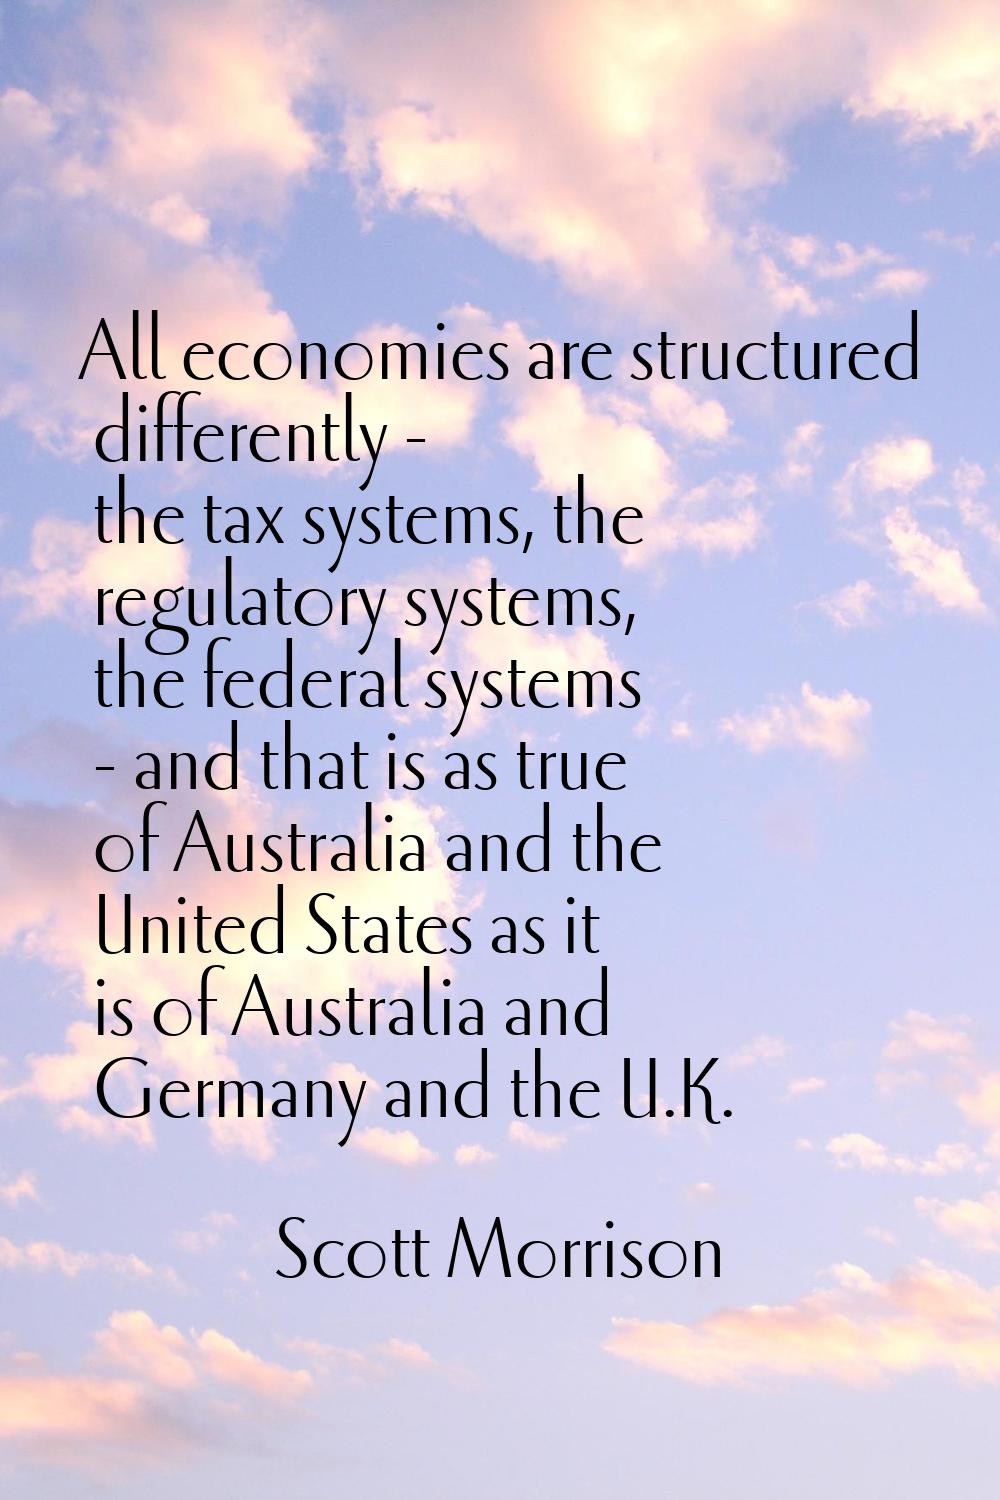 All economies are structured differently - the tax systems, the regulatory systems, the federal sys